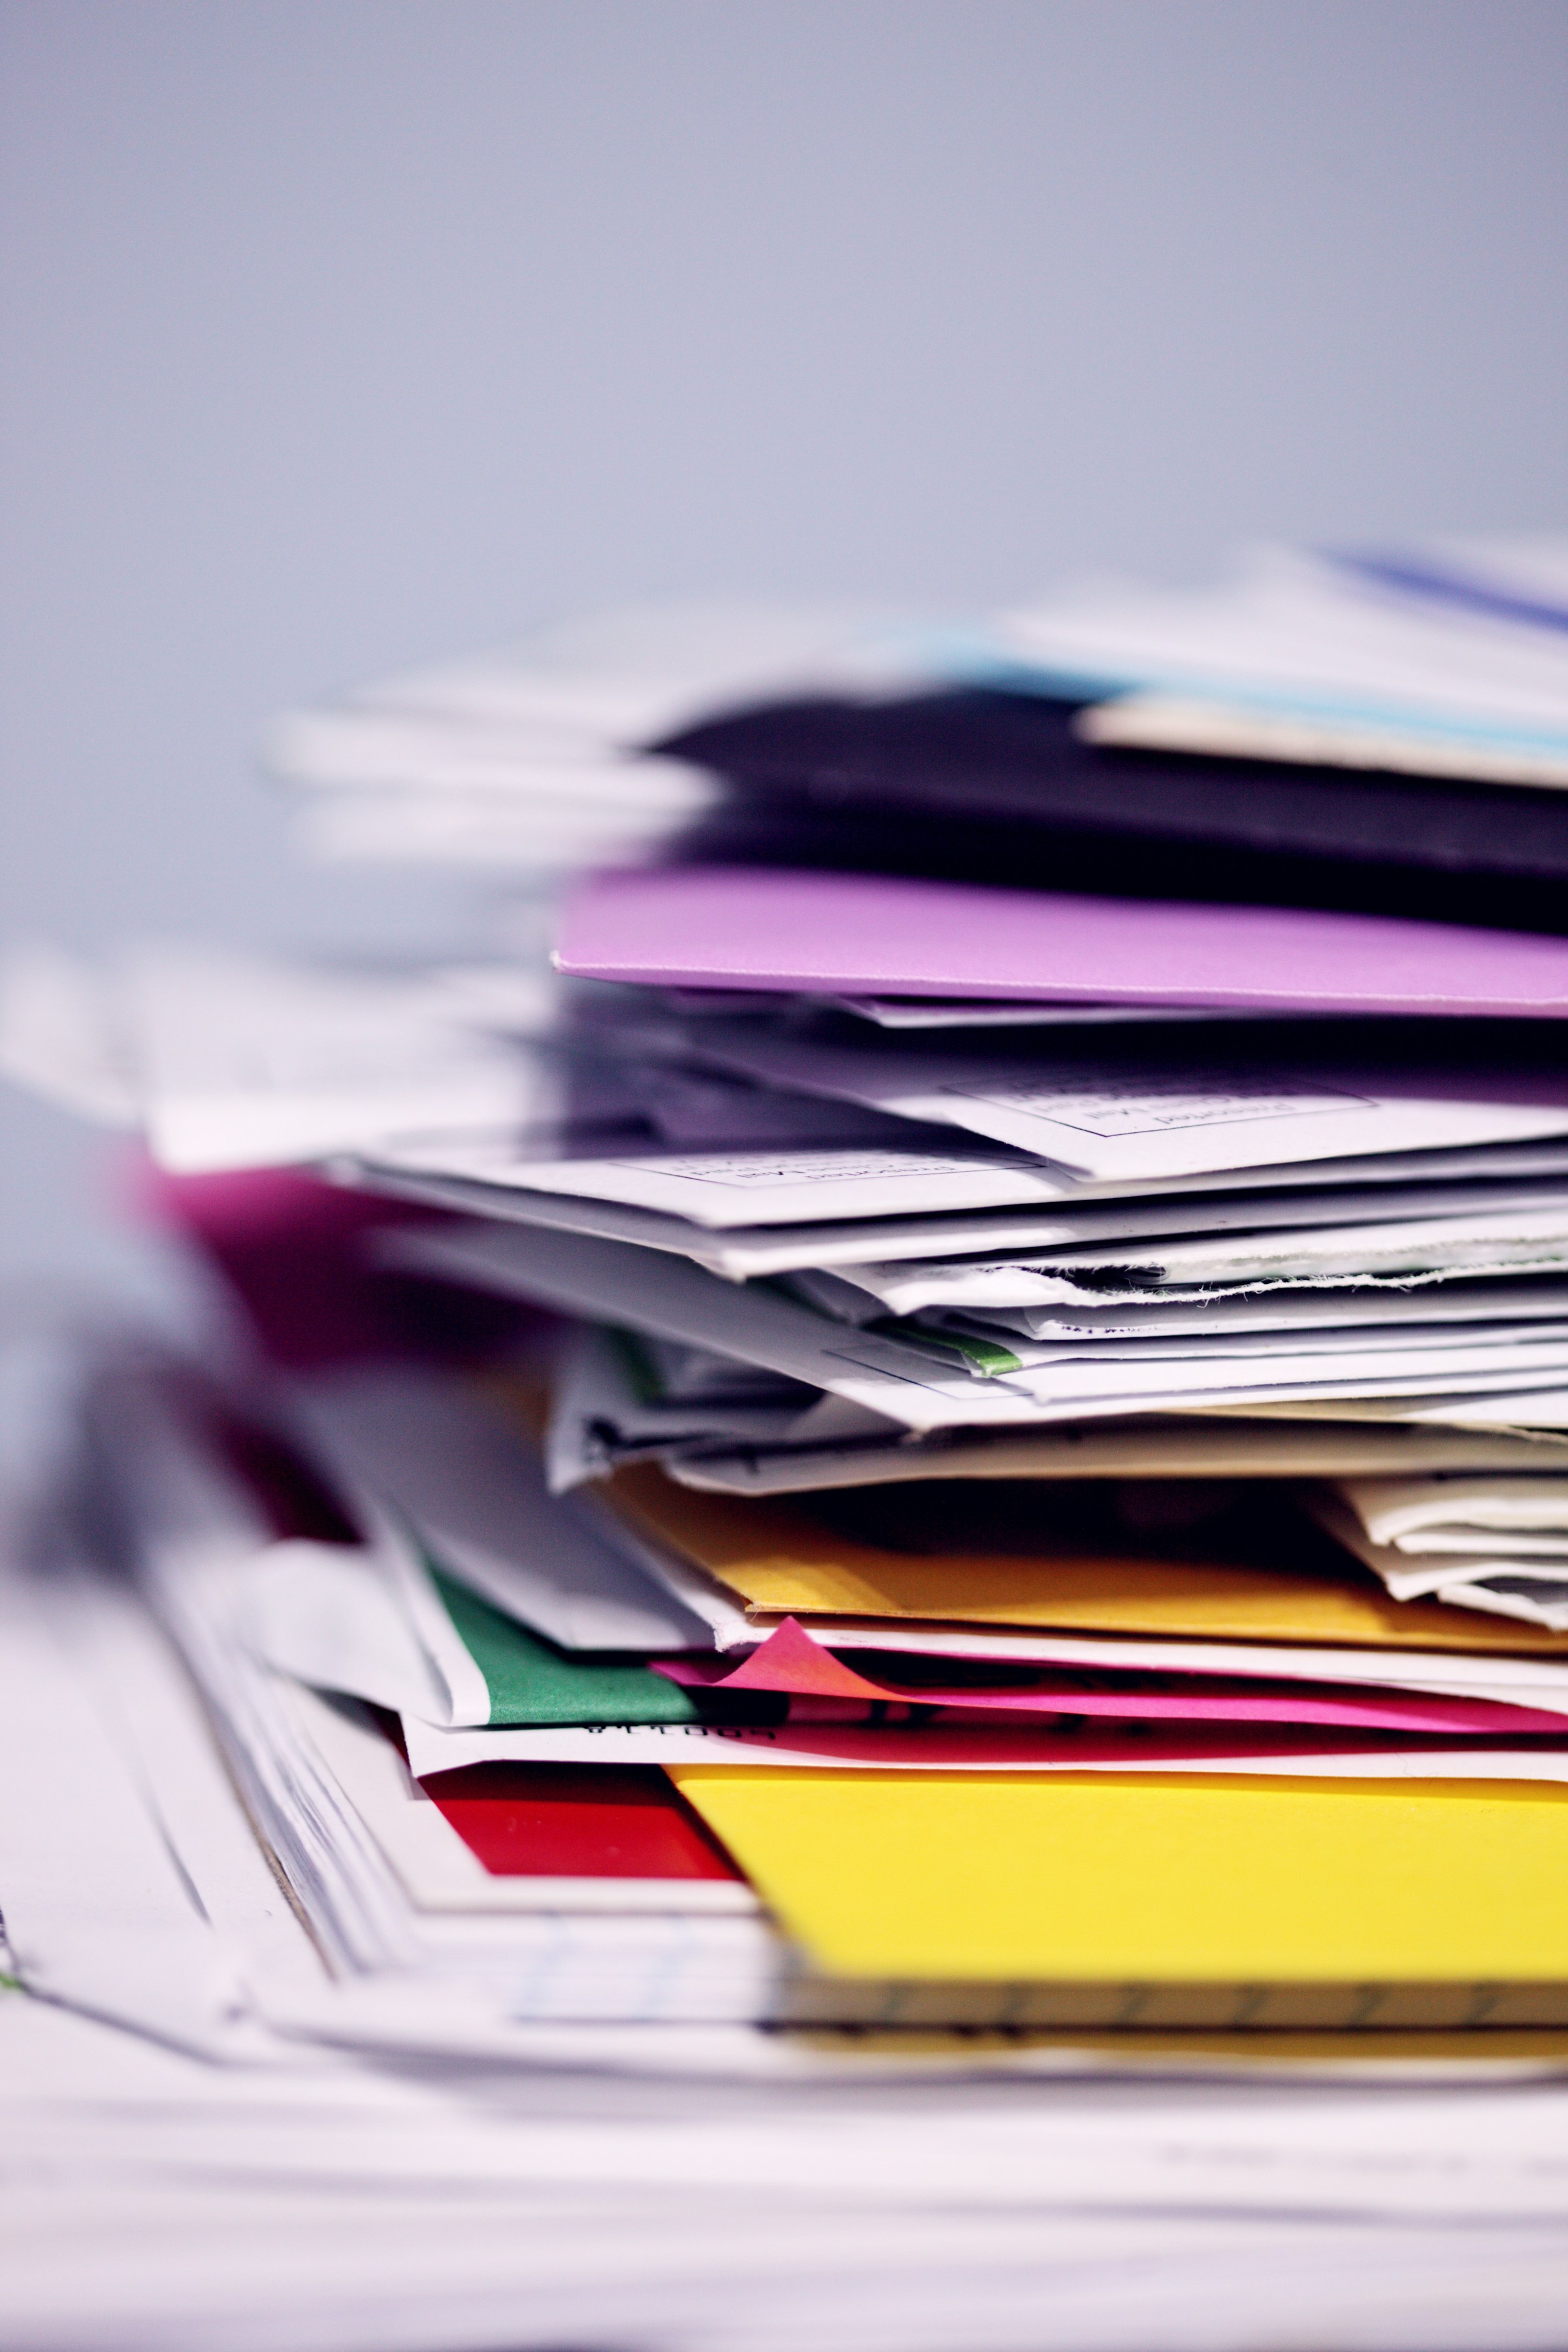 A pile of paperwork on a table | Source: Unsplash